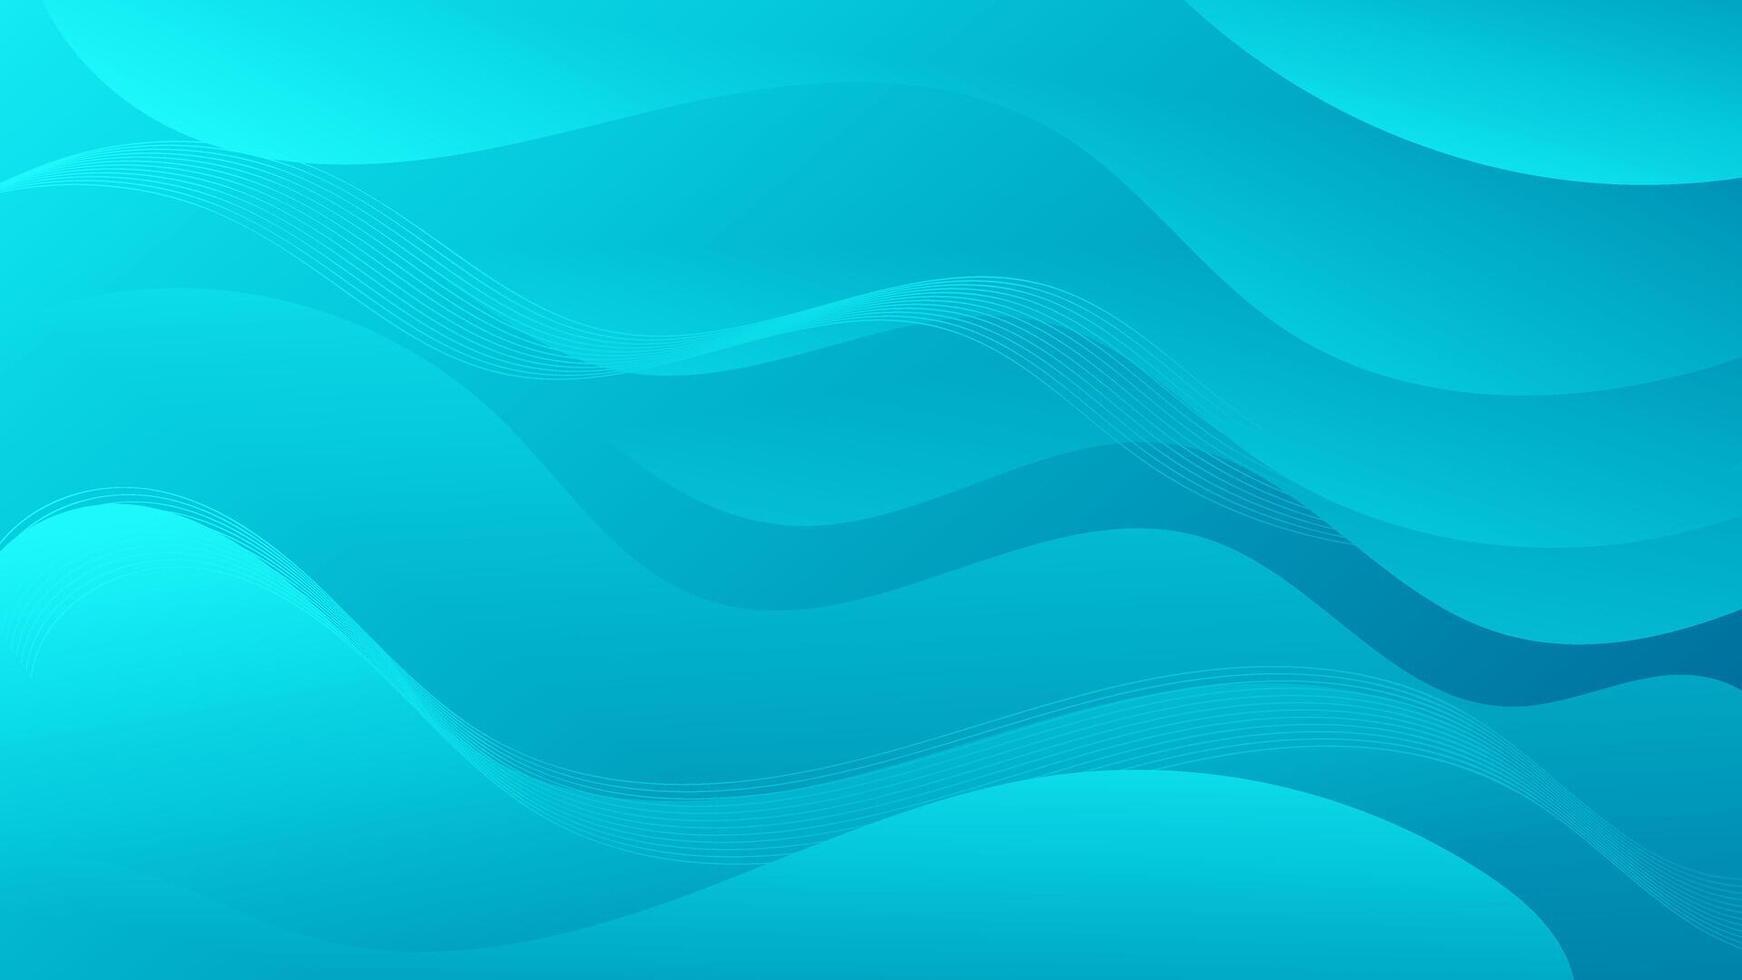 Abstract blue Background with Wavy Shapes. flowing and curvy shapes. This asset is suitable for website backgrounds, flyers, posters, and digital art projects. vector